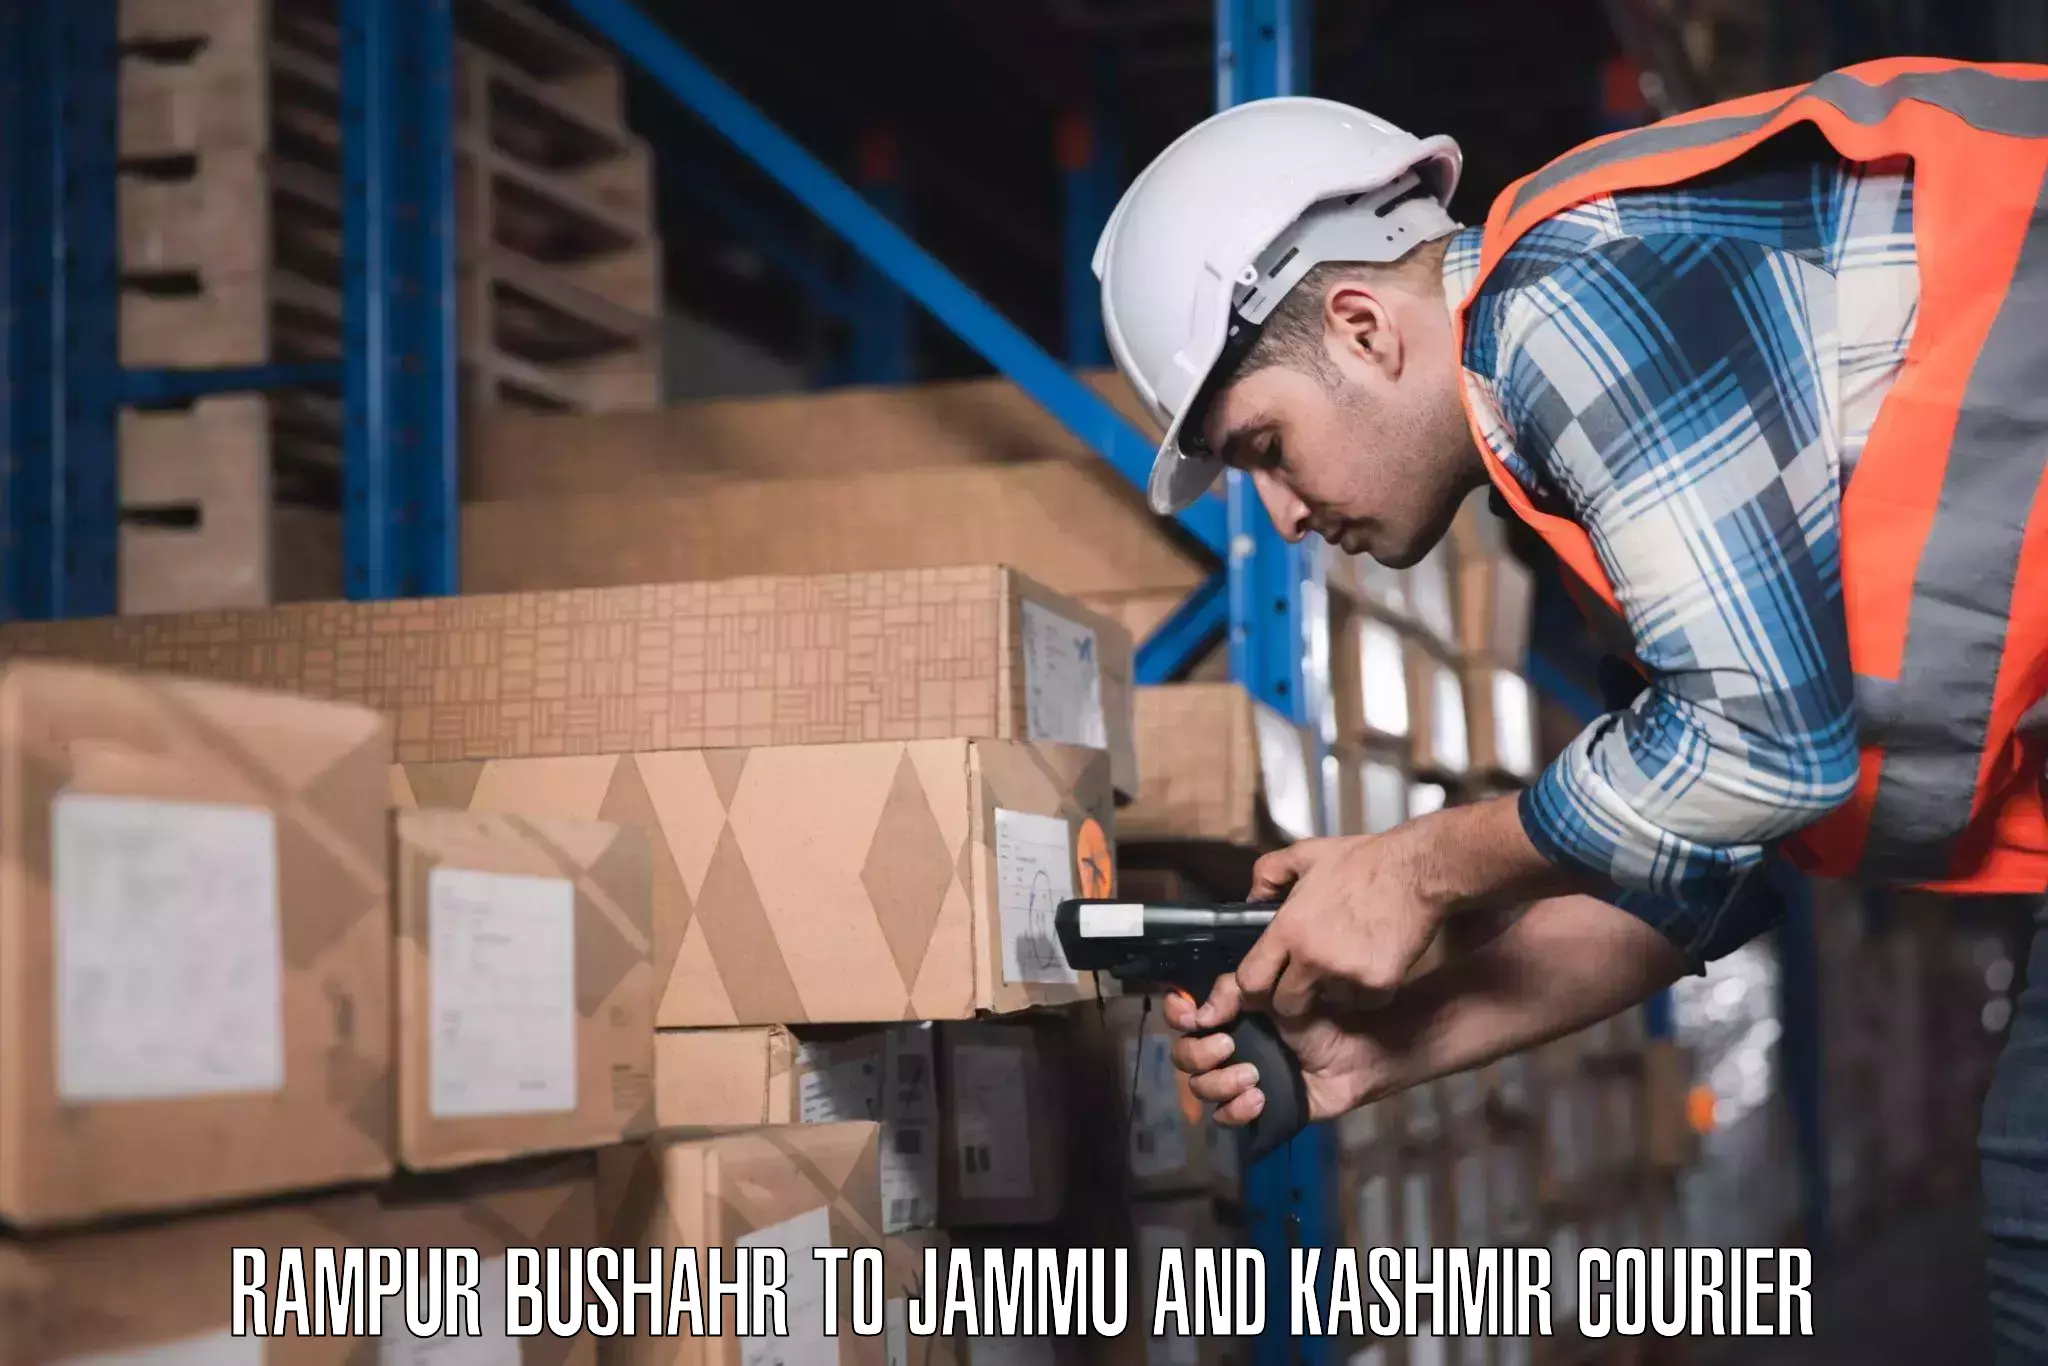 Luggage delivery network Rampur Bushahr to Jakh